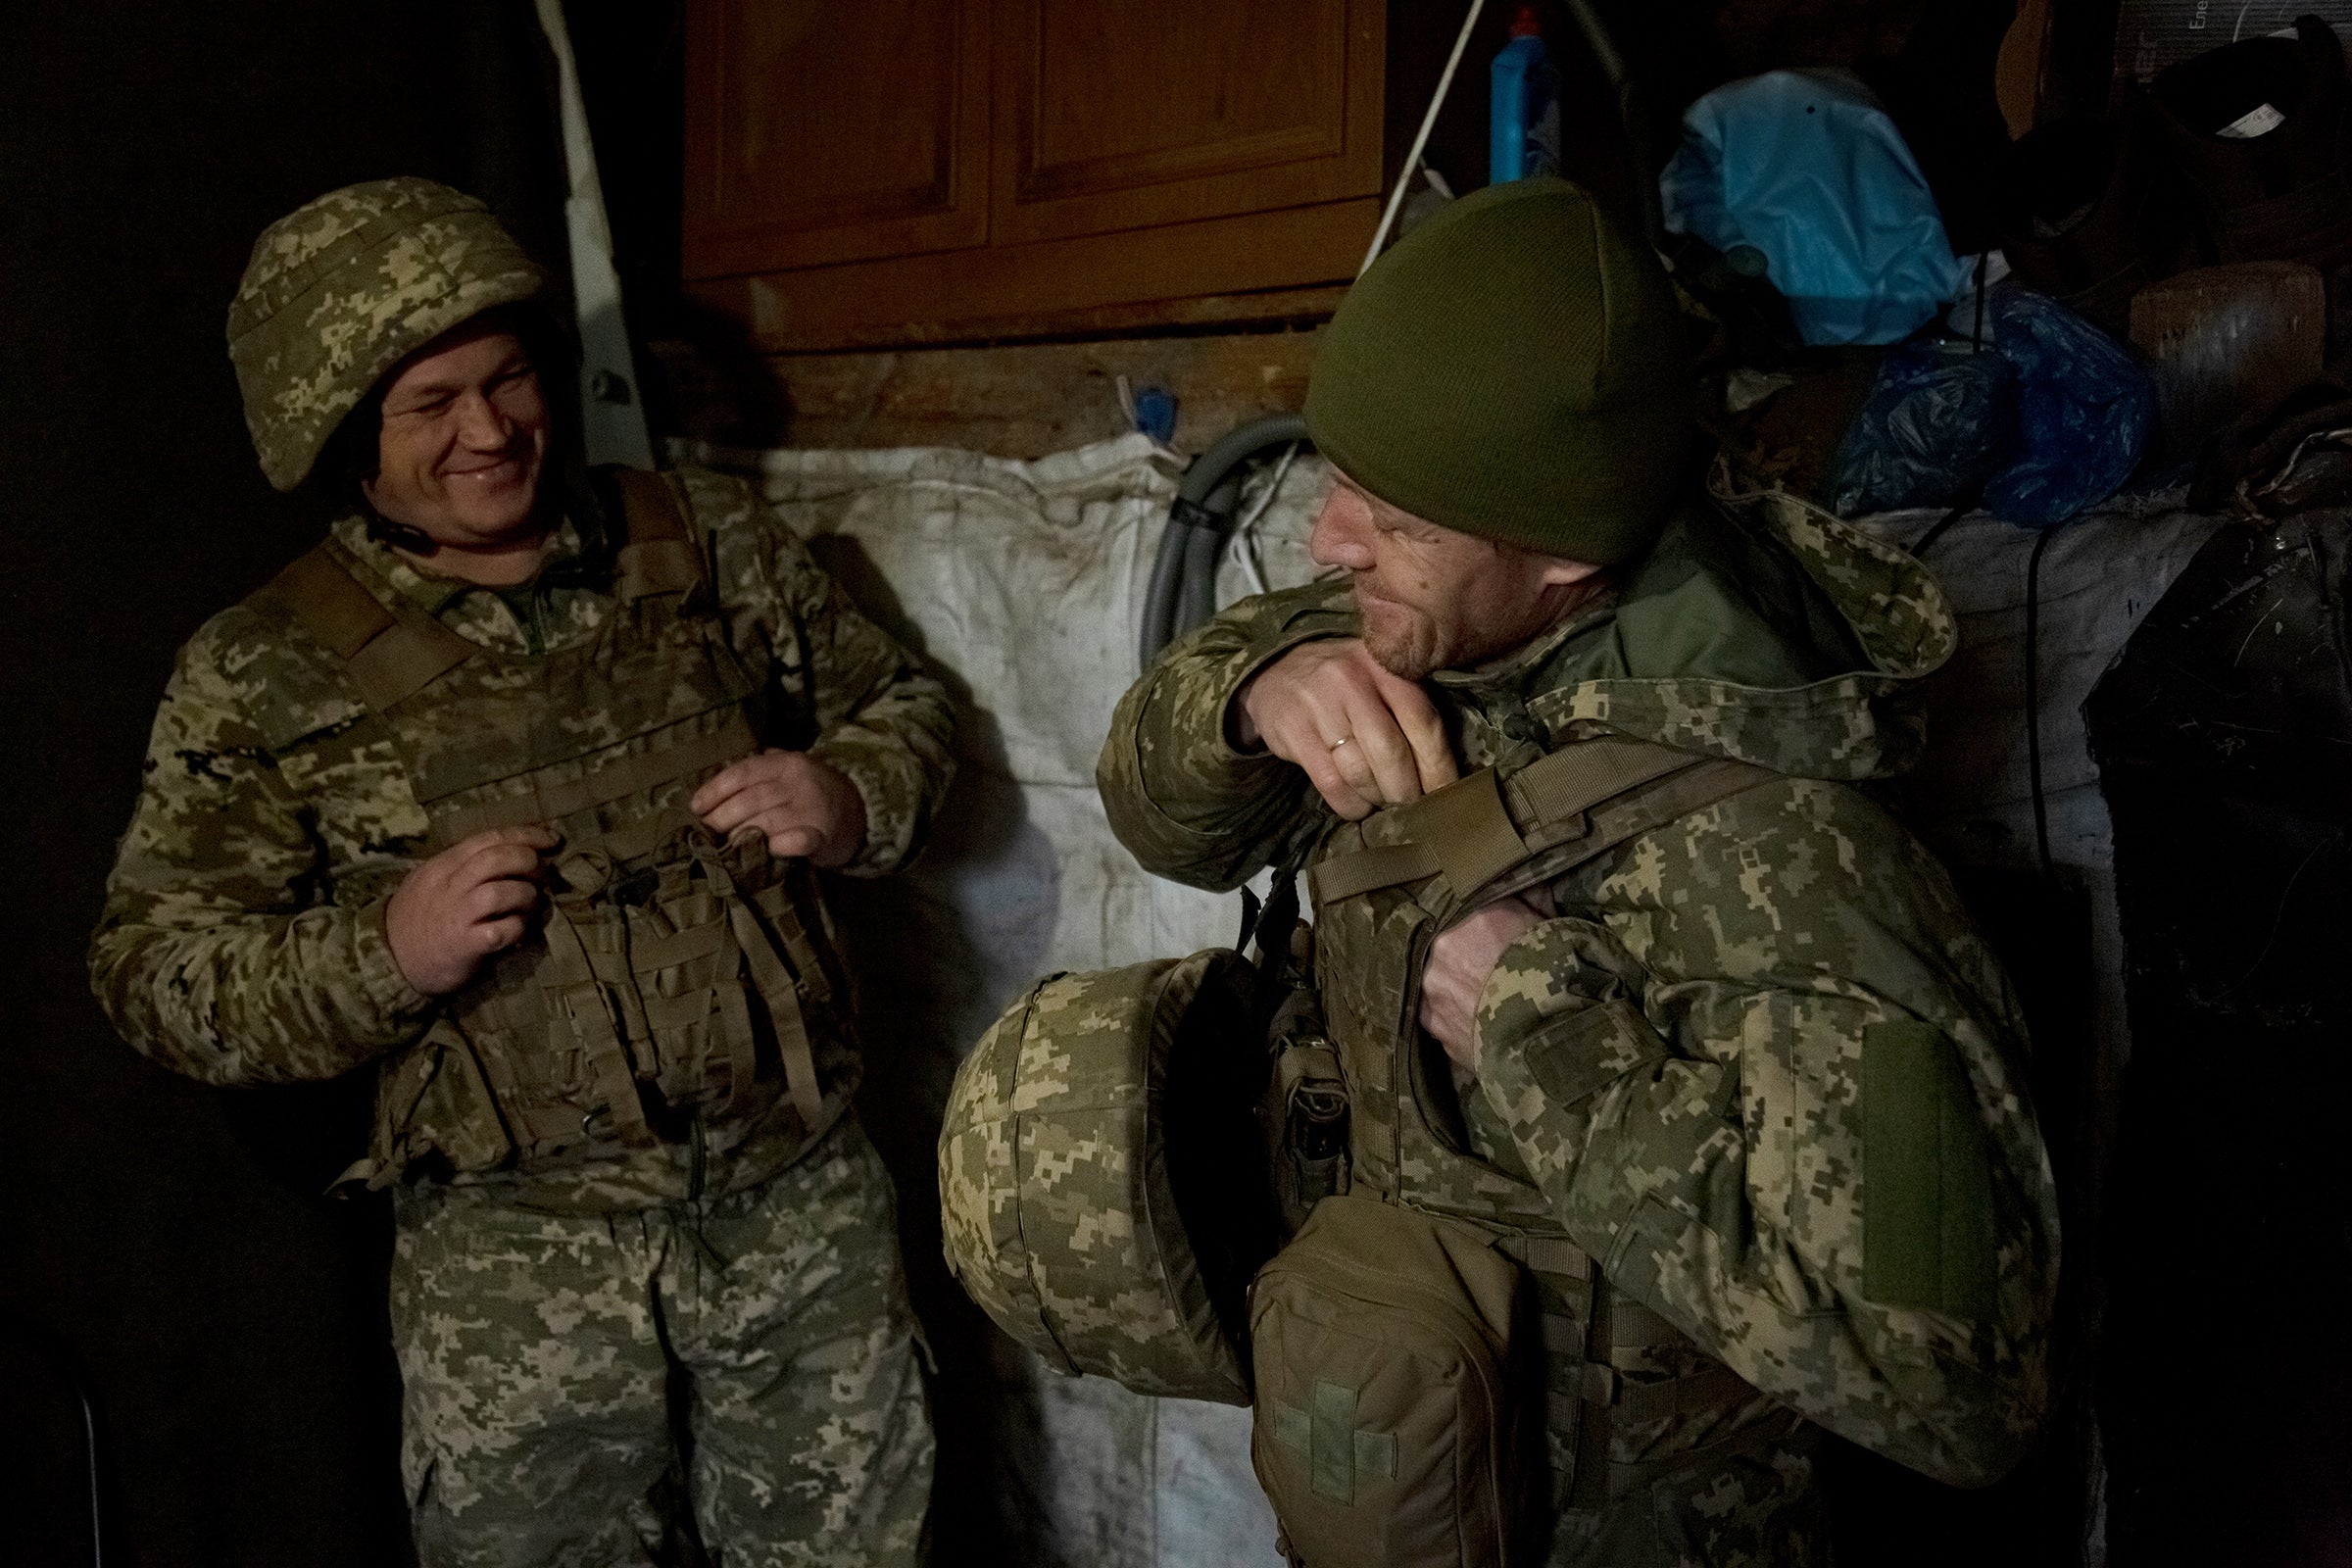 Ukrainian Female Soldiers: How the Women of Ukraine Are Fighting Back